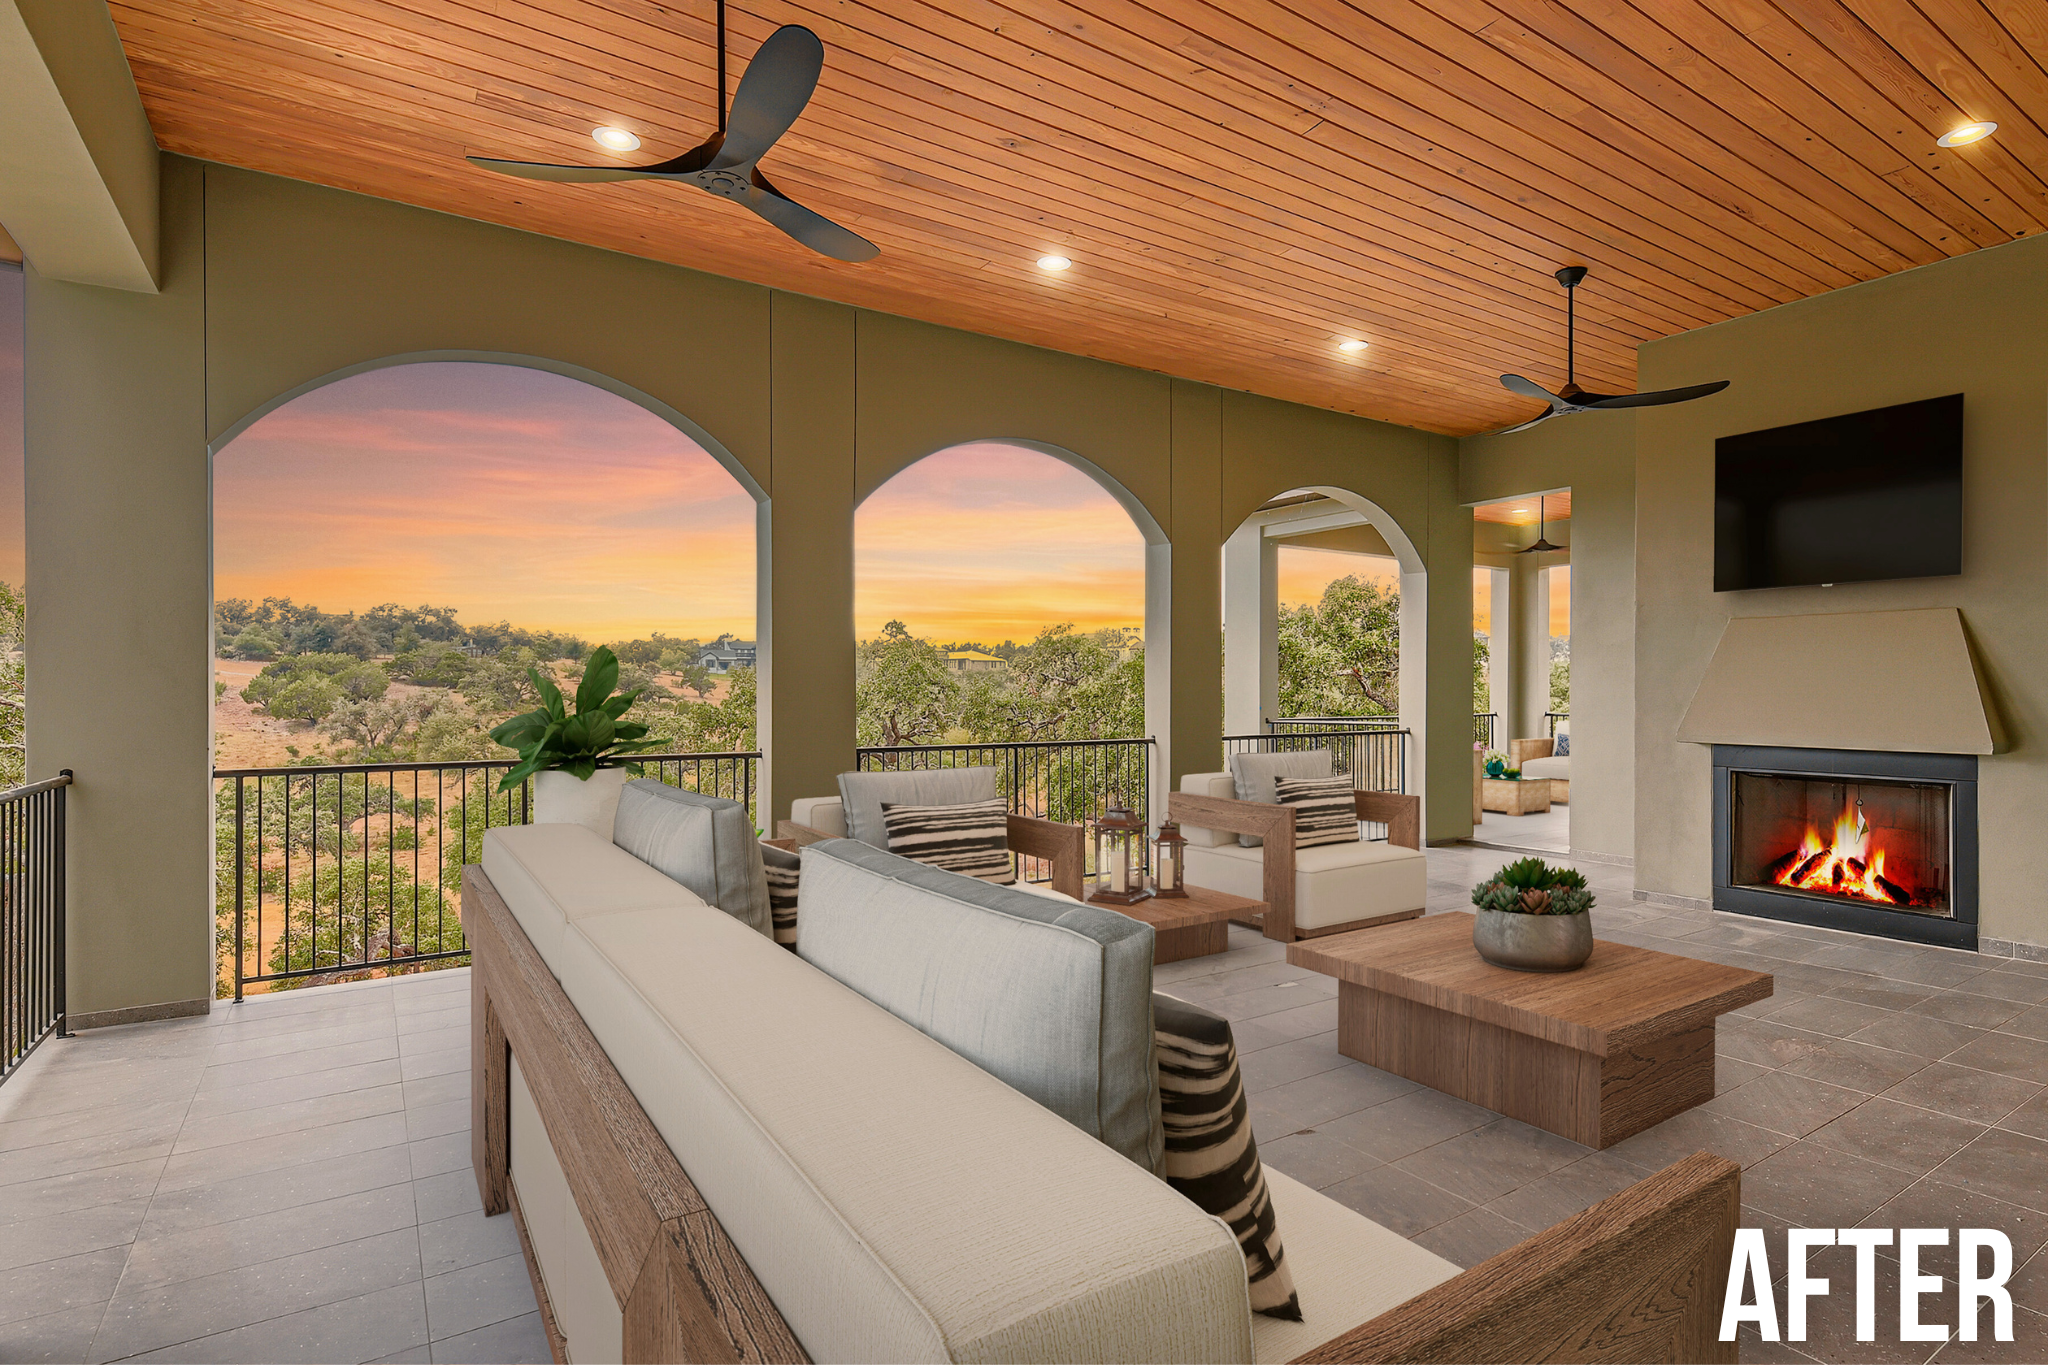 Square Foot Productions, Virtual Staging after image depicting an outdoor patio with lounge furniture, a fireplace, and twilight edit to help build trust with clients